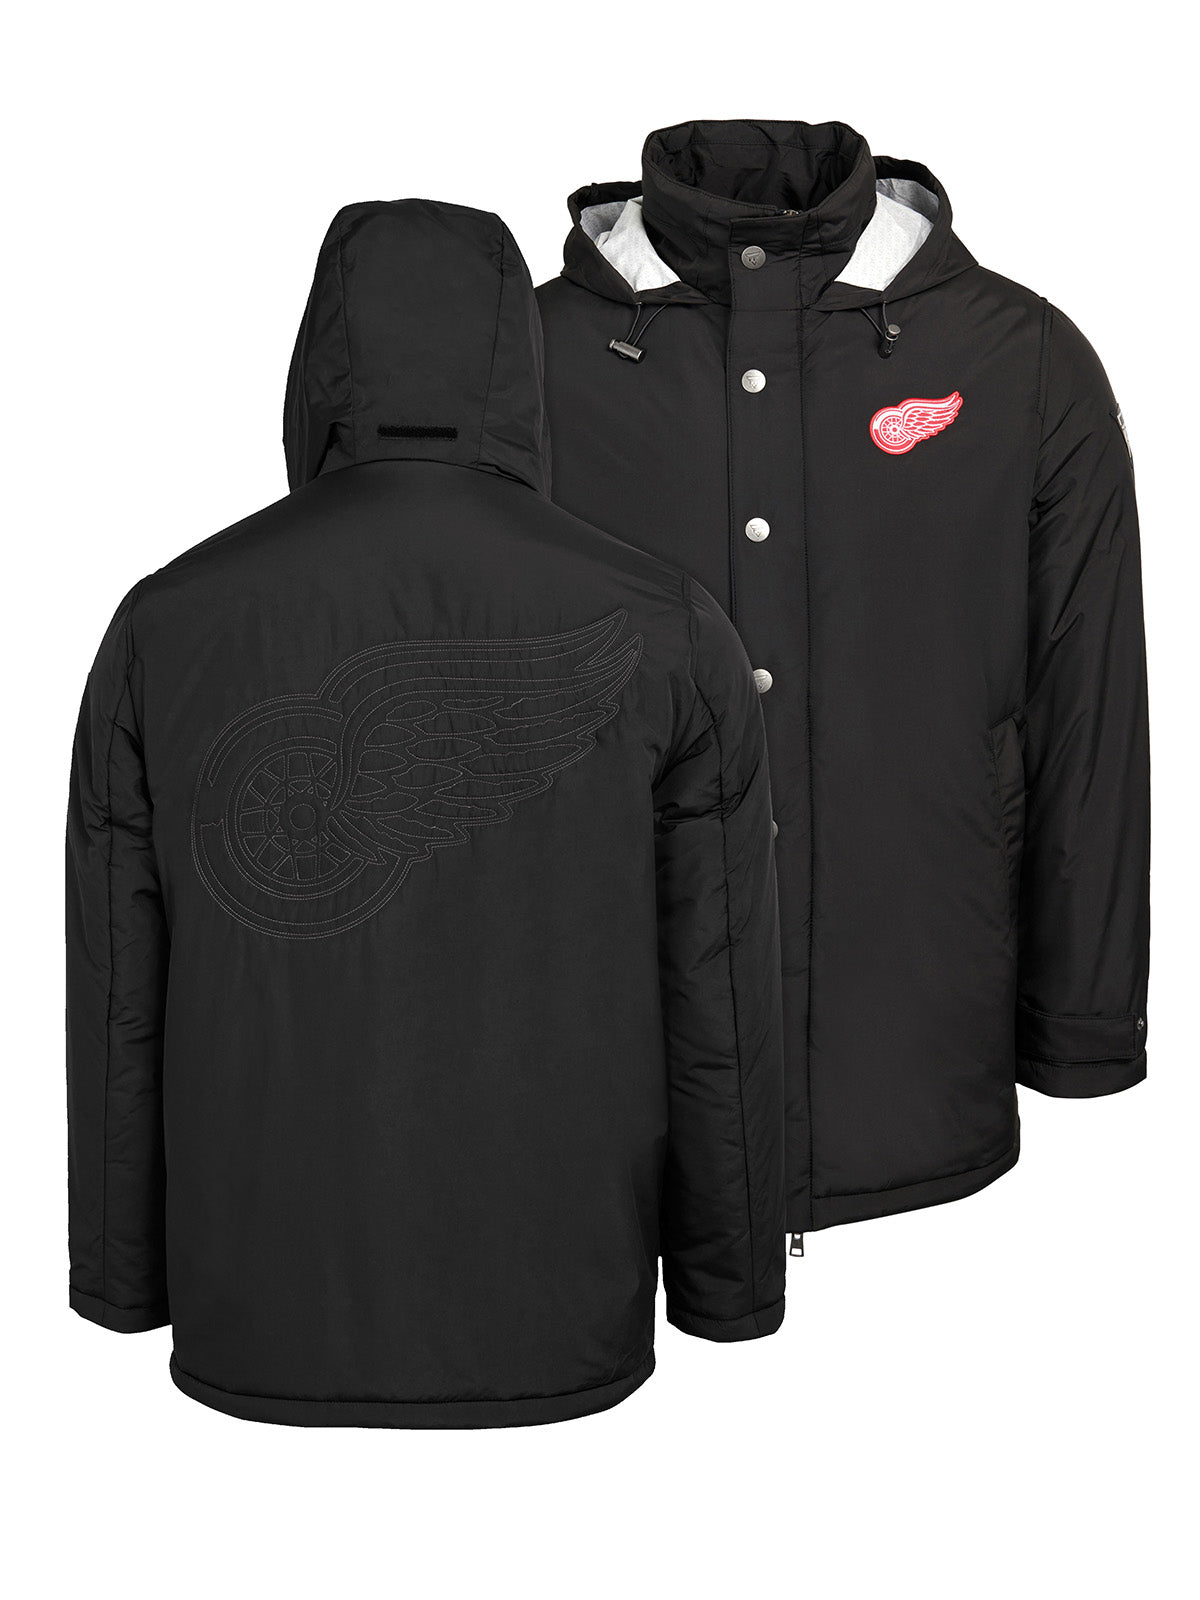 Detroit Red Wings Coach's Jacket - The jacket features a quilted stitch of the Detroit Red Wings logo centered on the back and has a removal hood in the team colors, elevating this NHL hockey clothing collection